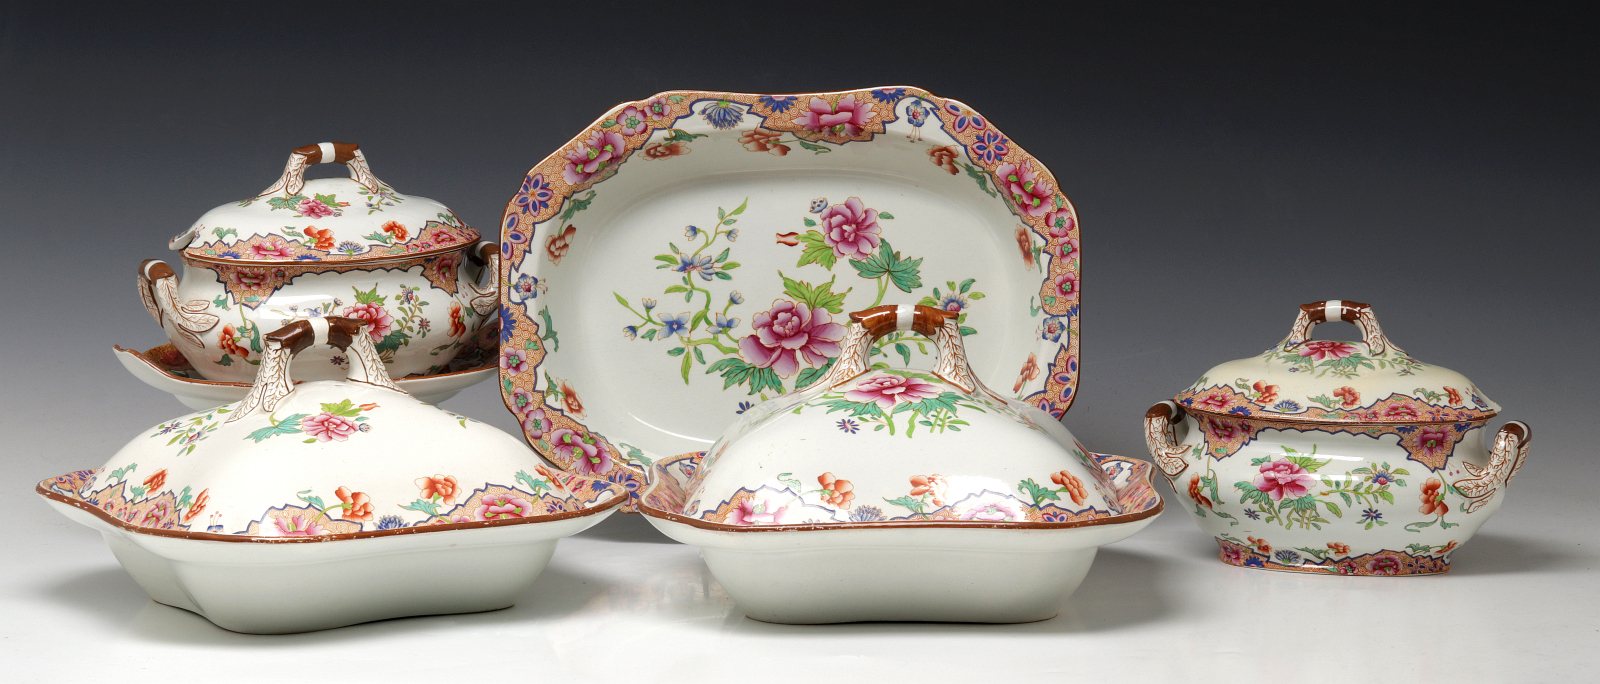 EARLY SPODE CHINA SERVING PIECES PATTERN 3154